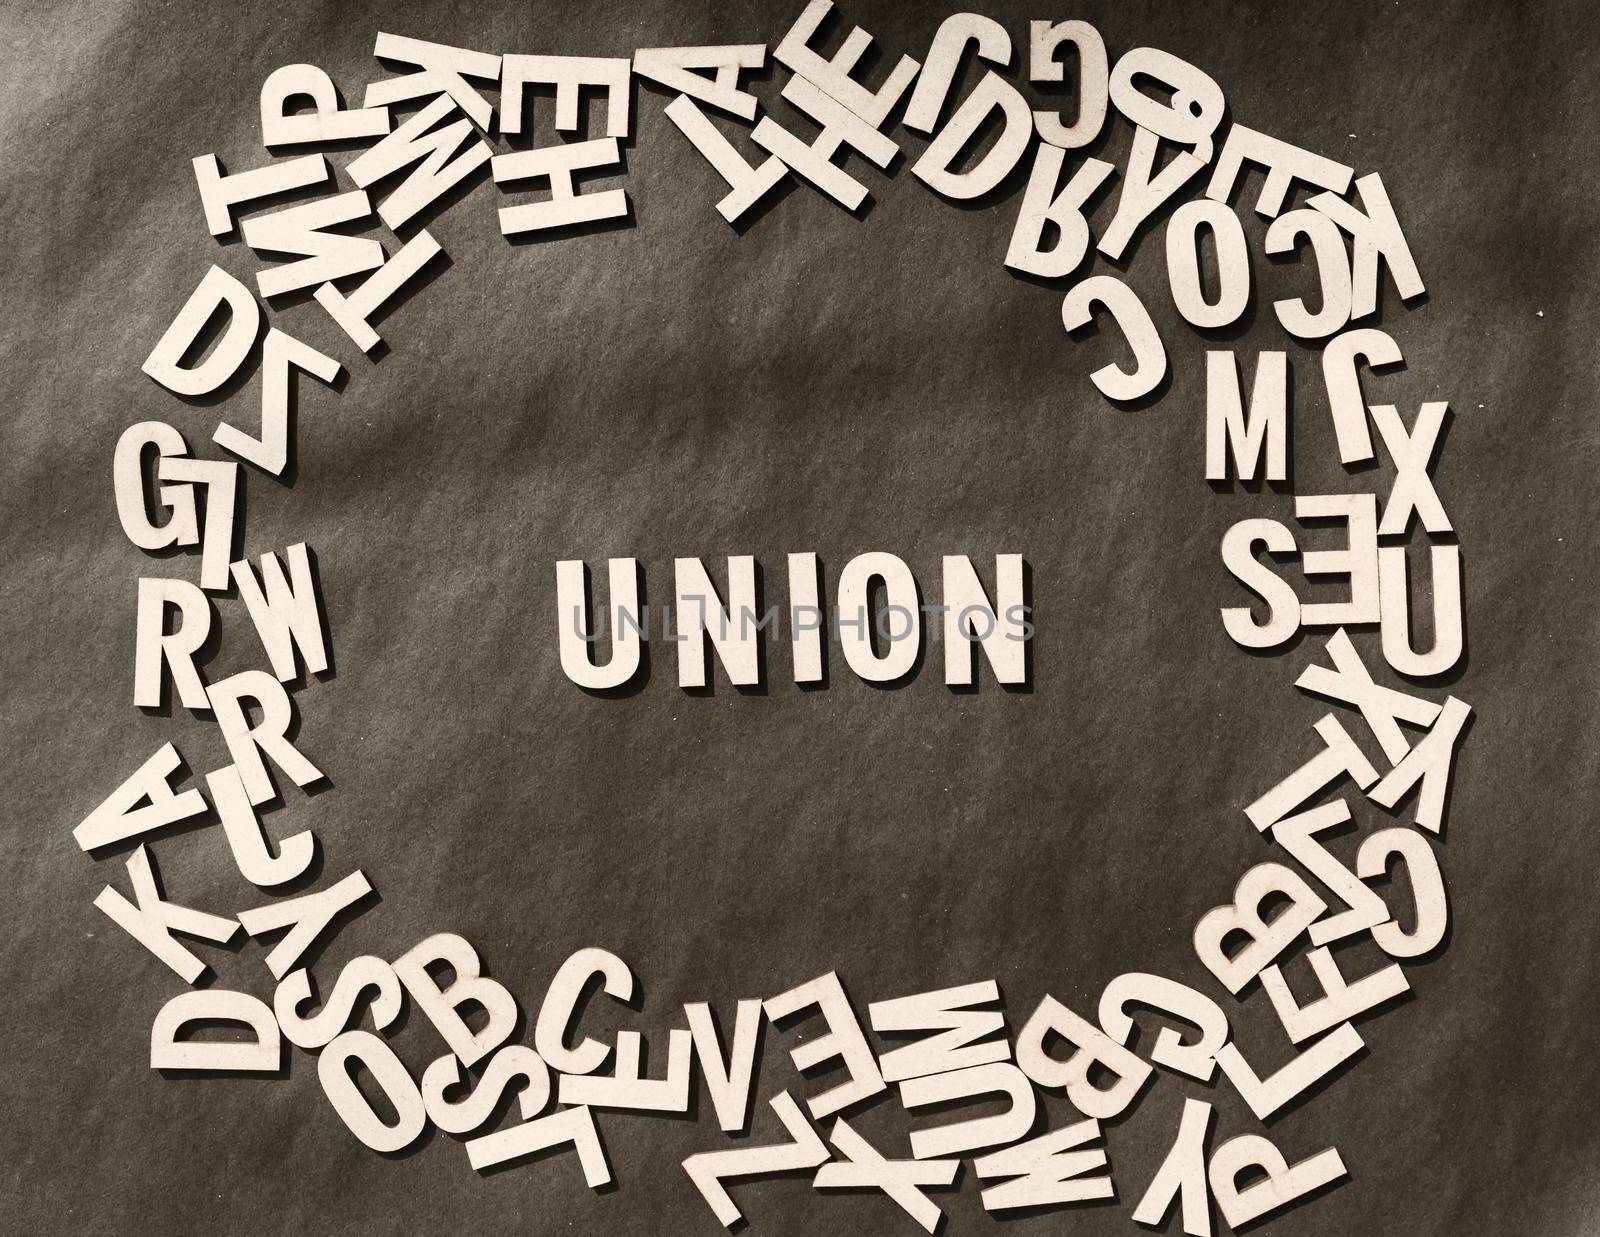 Union Word In Wooden Cube Alphabet Letters Top View On A rustic paper Background.